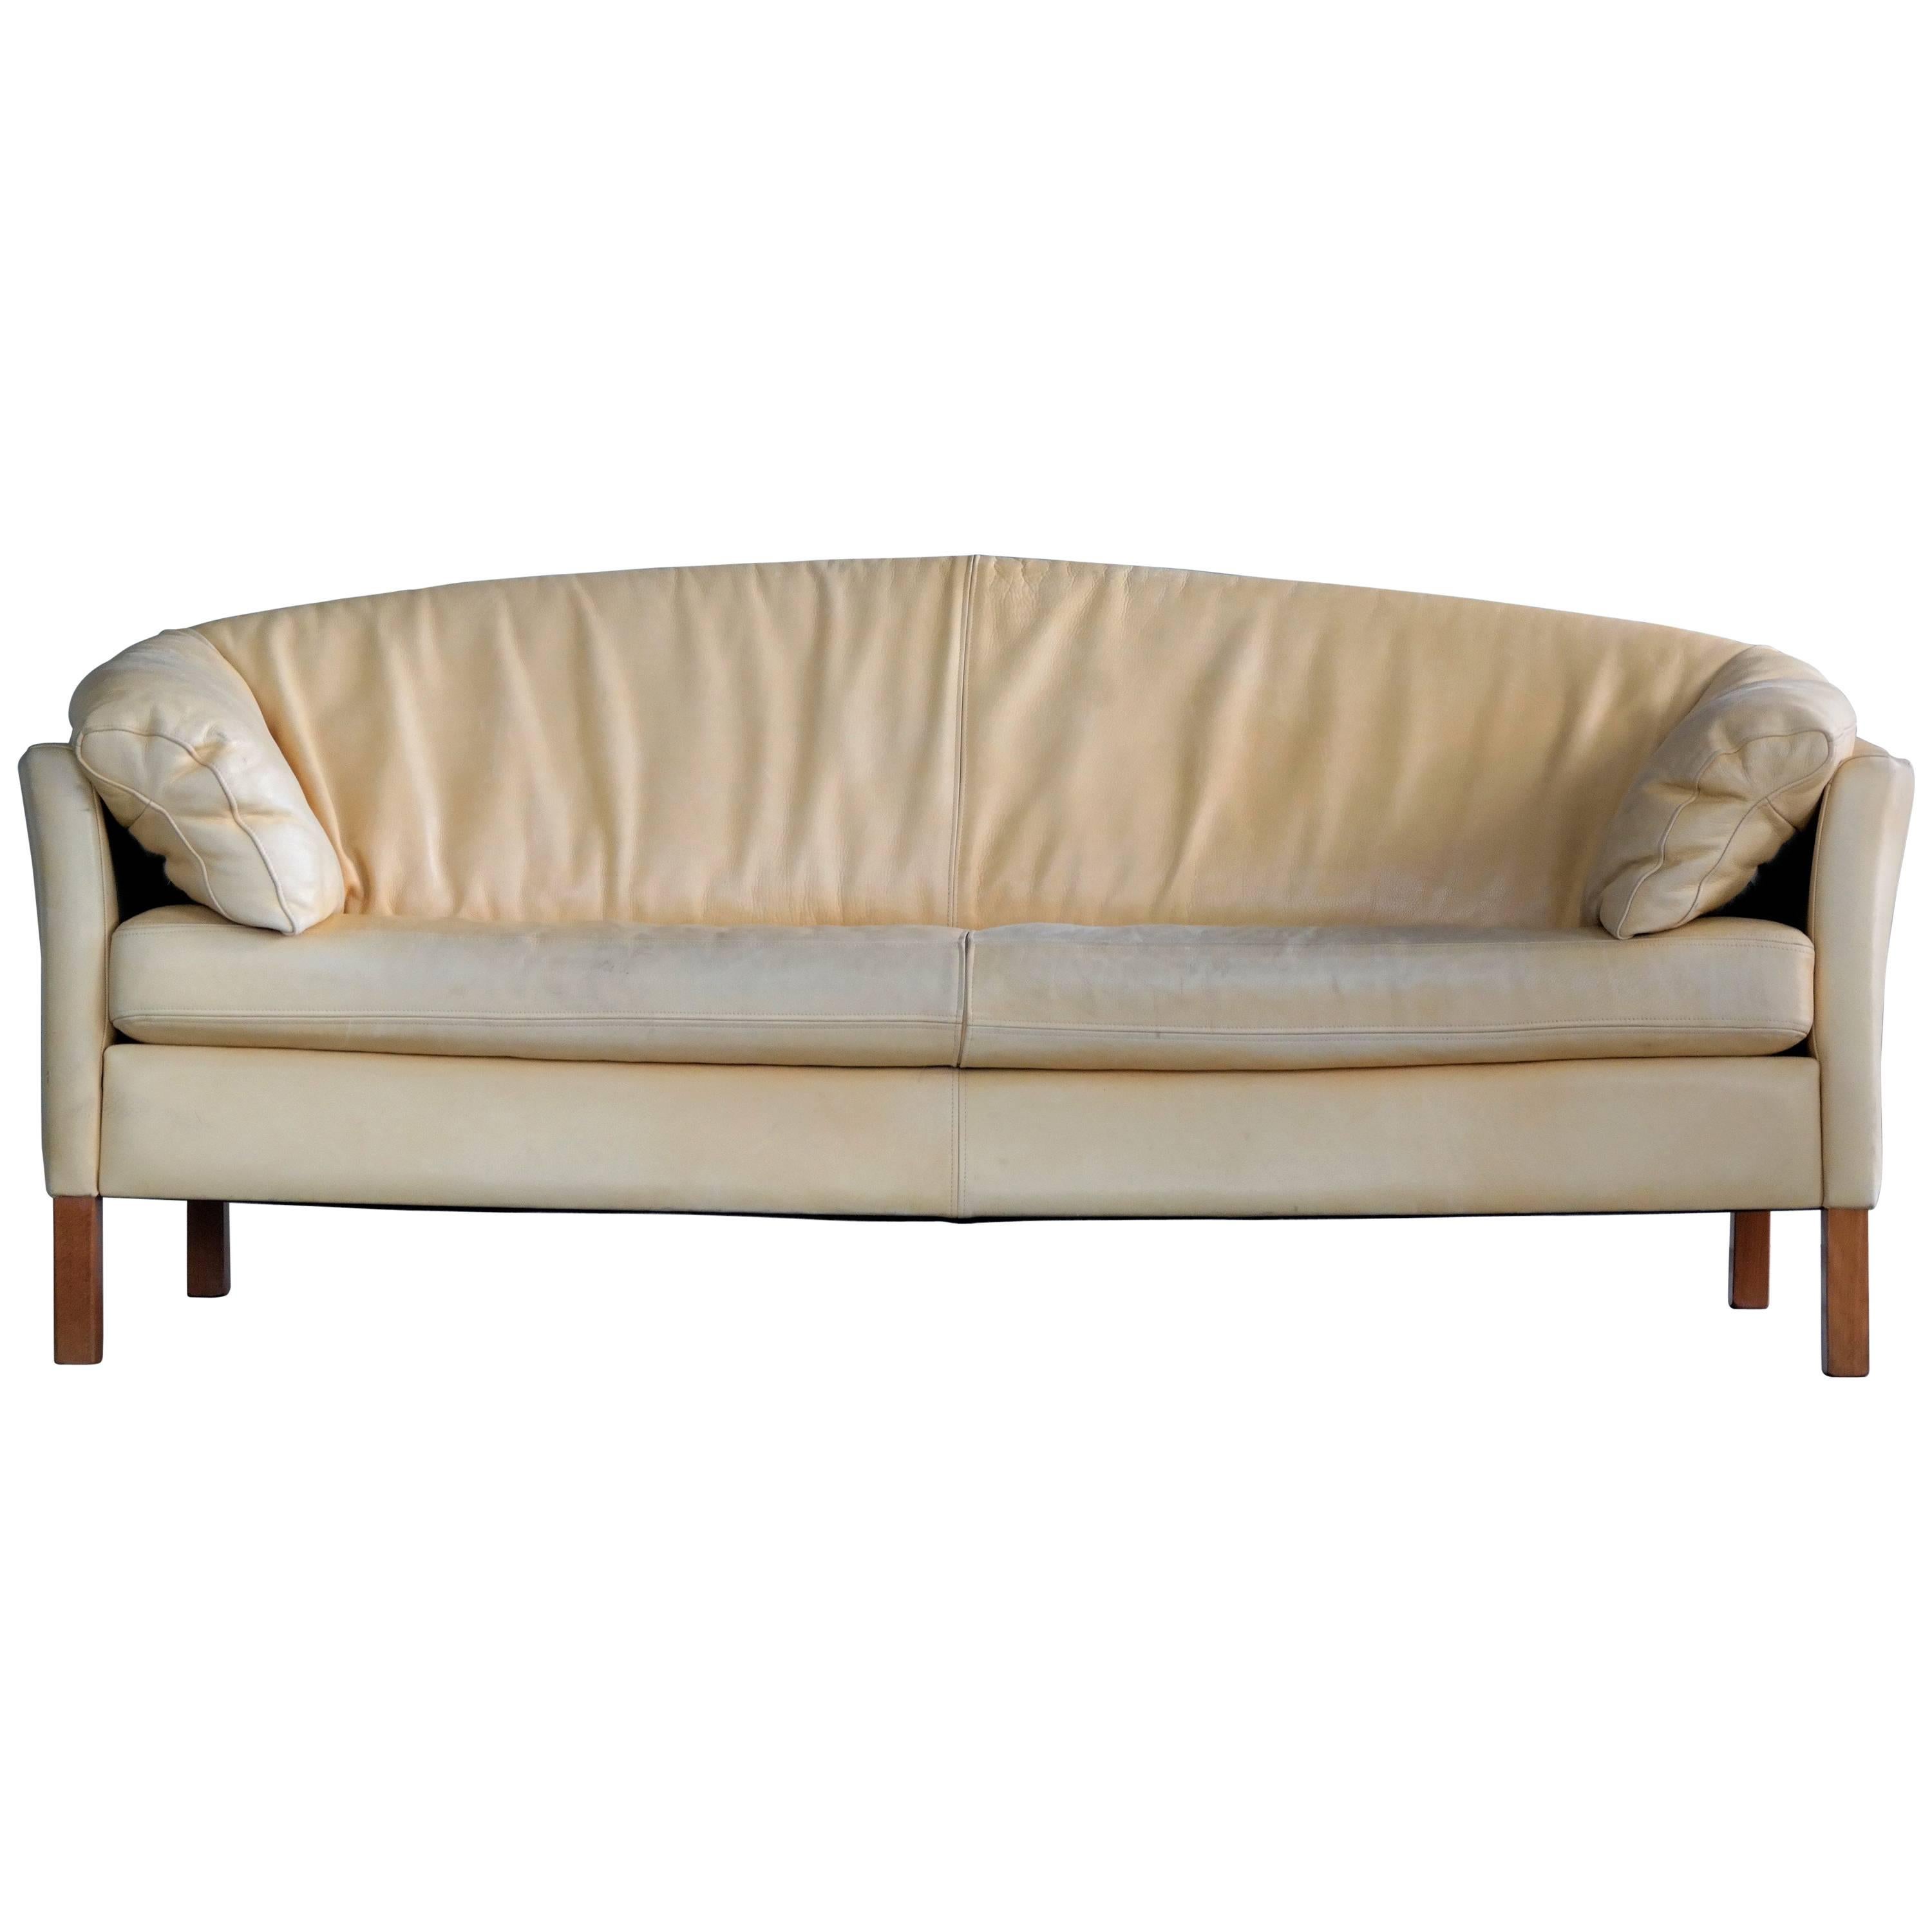 Danish Curved Sofa in Pale Yellow Leather Model MH535 by Mogens Hansen